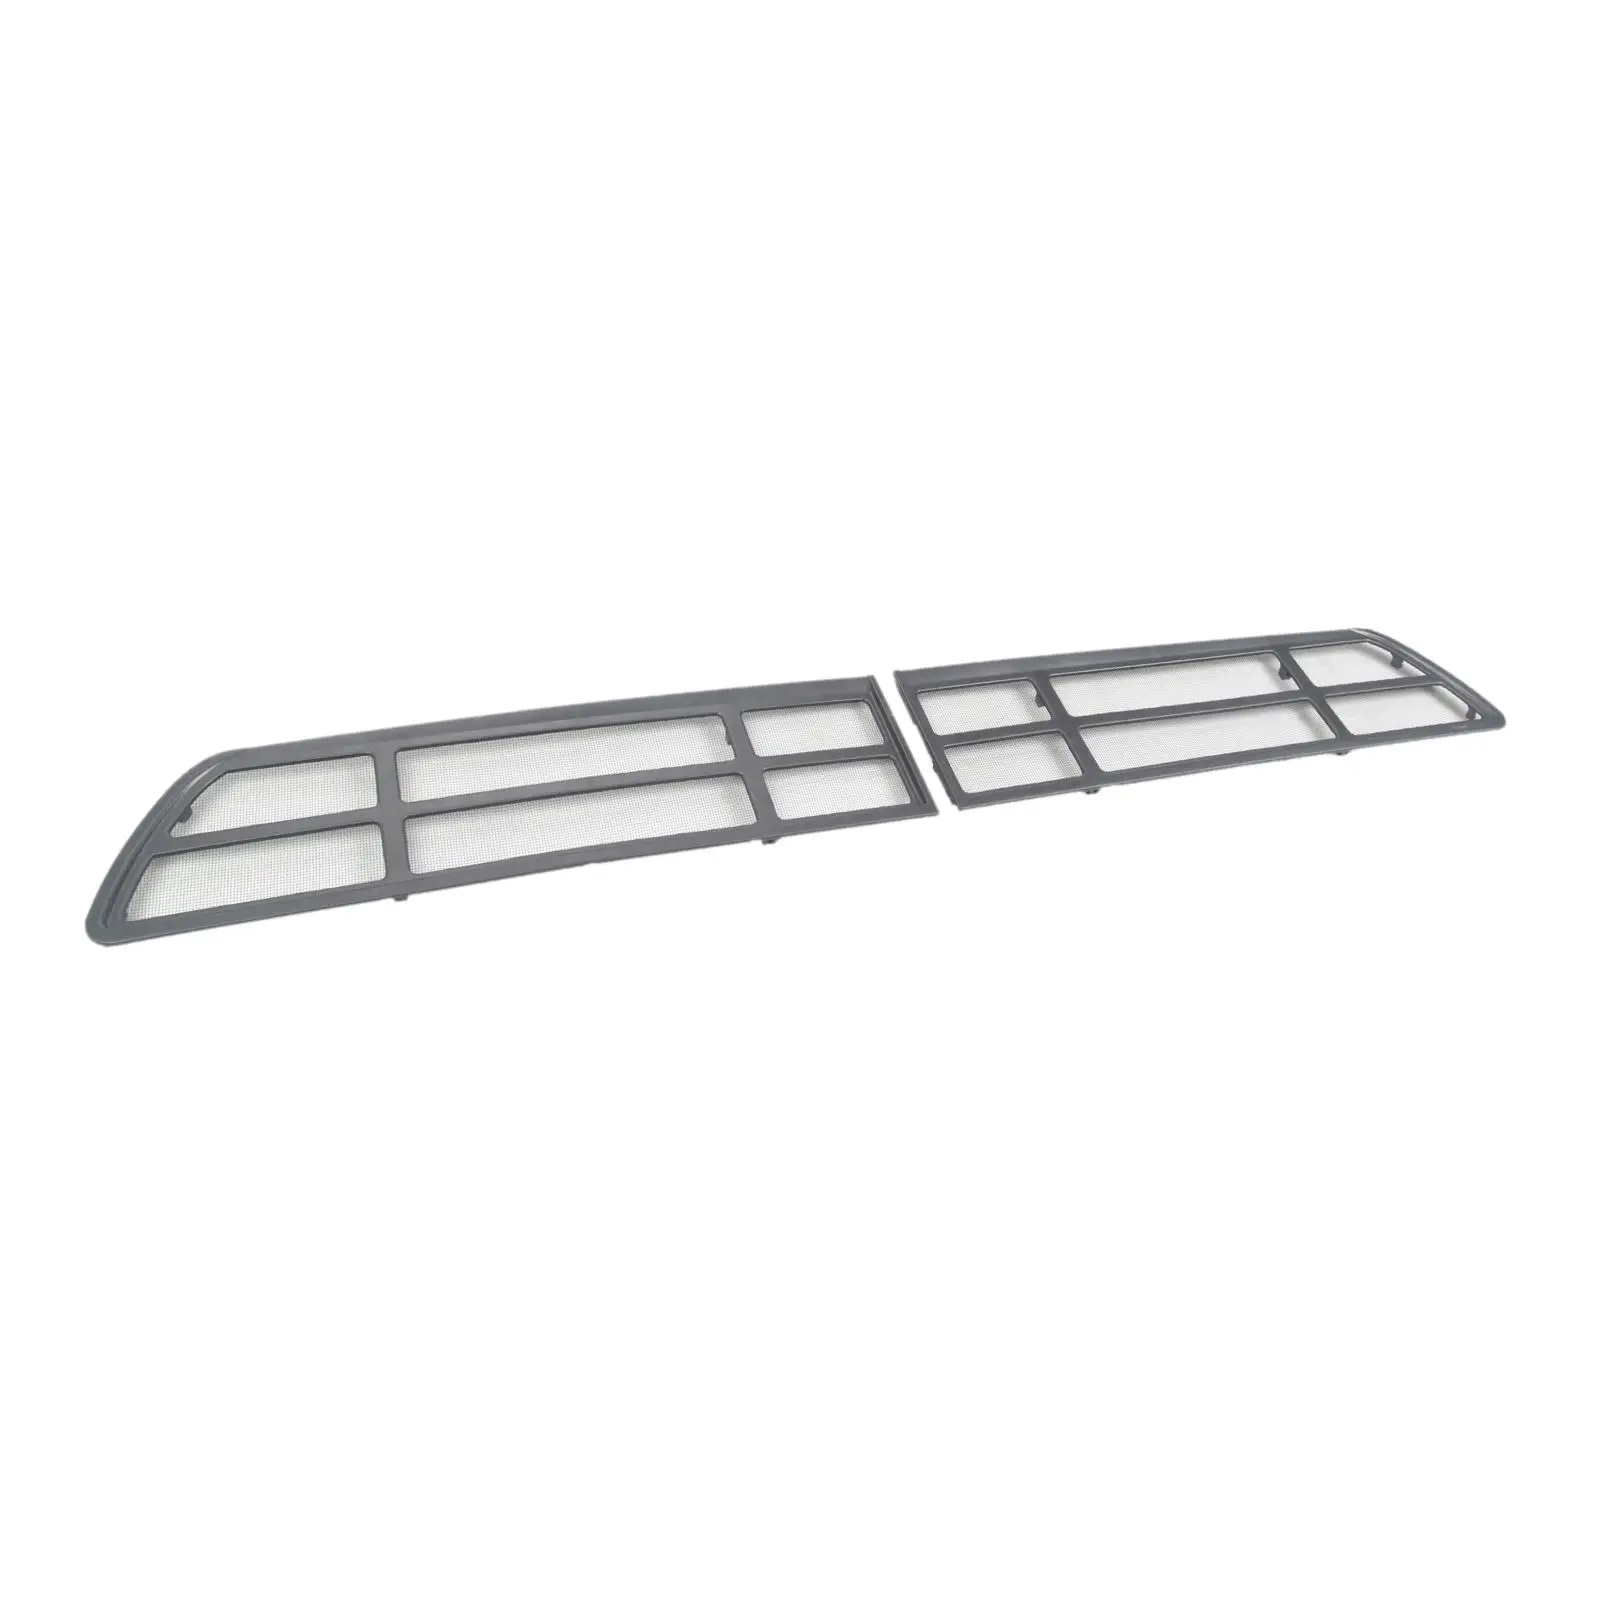 Air Vent Intake Protection Cover Trim Grille for Accessories